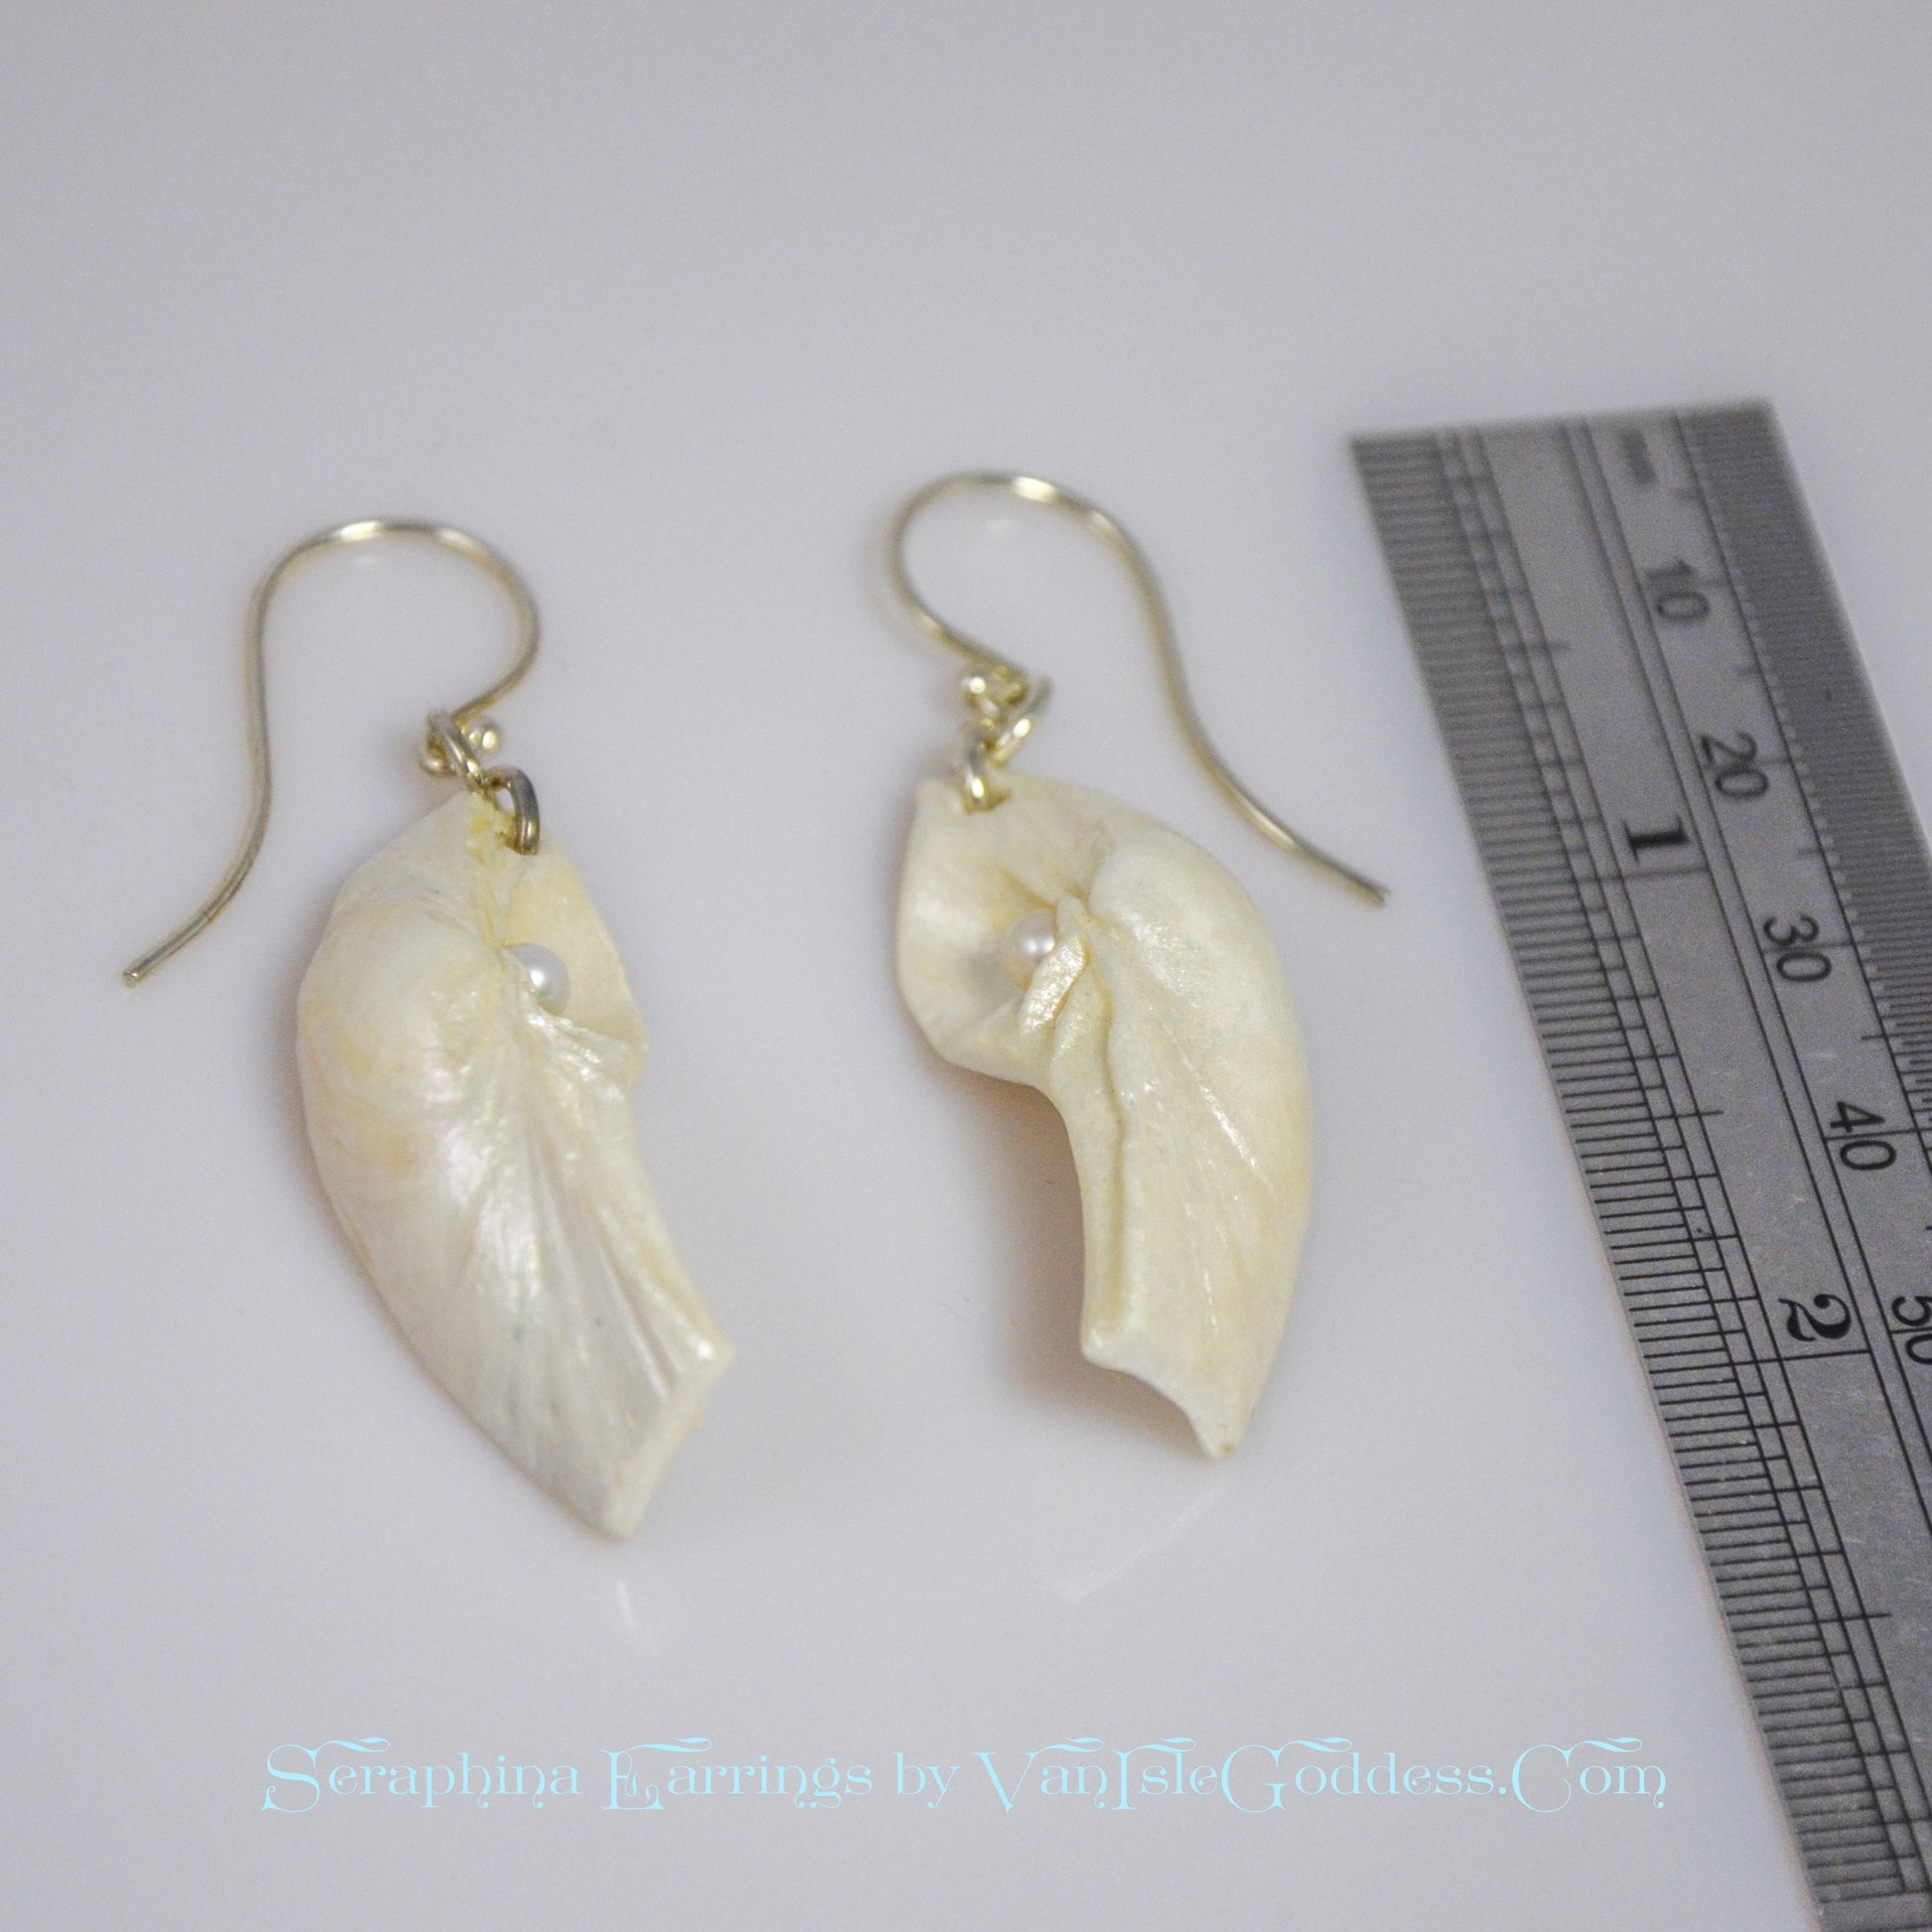 Seraphina natural seashell earrings with real baby freshwater pearls.  The earrings are shown with a ruler so the viewer can see the length of the earrings.